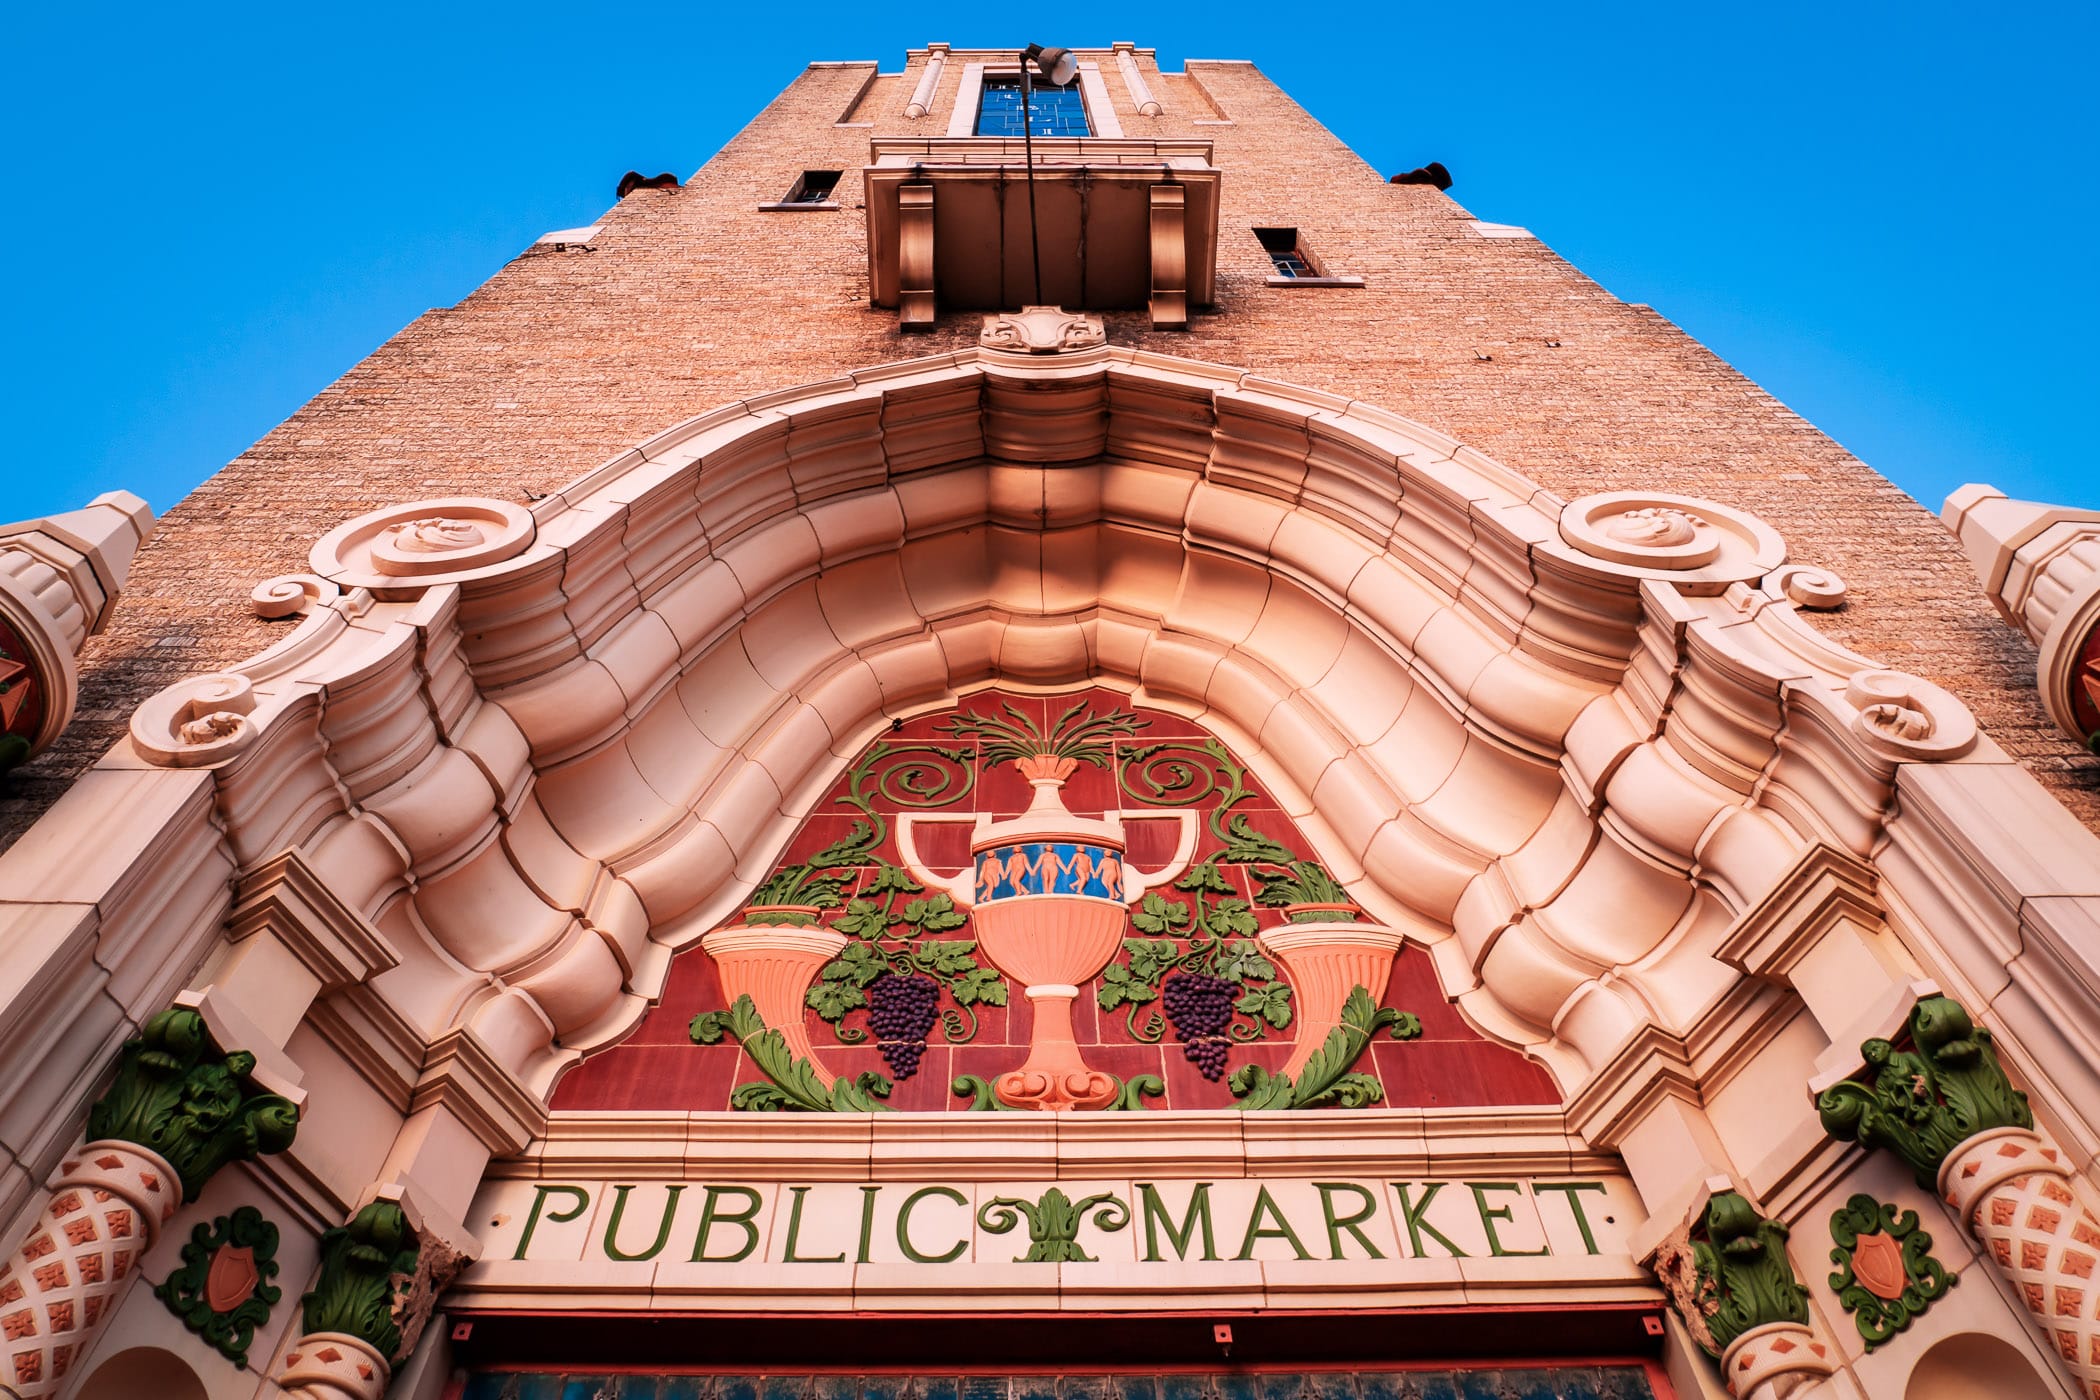 The ornate and colorful facade of the disused Public Market Building in Fort Worth, Texas.